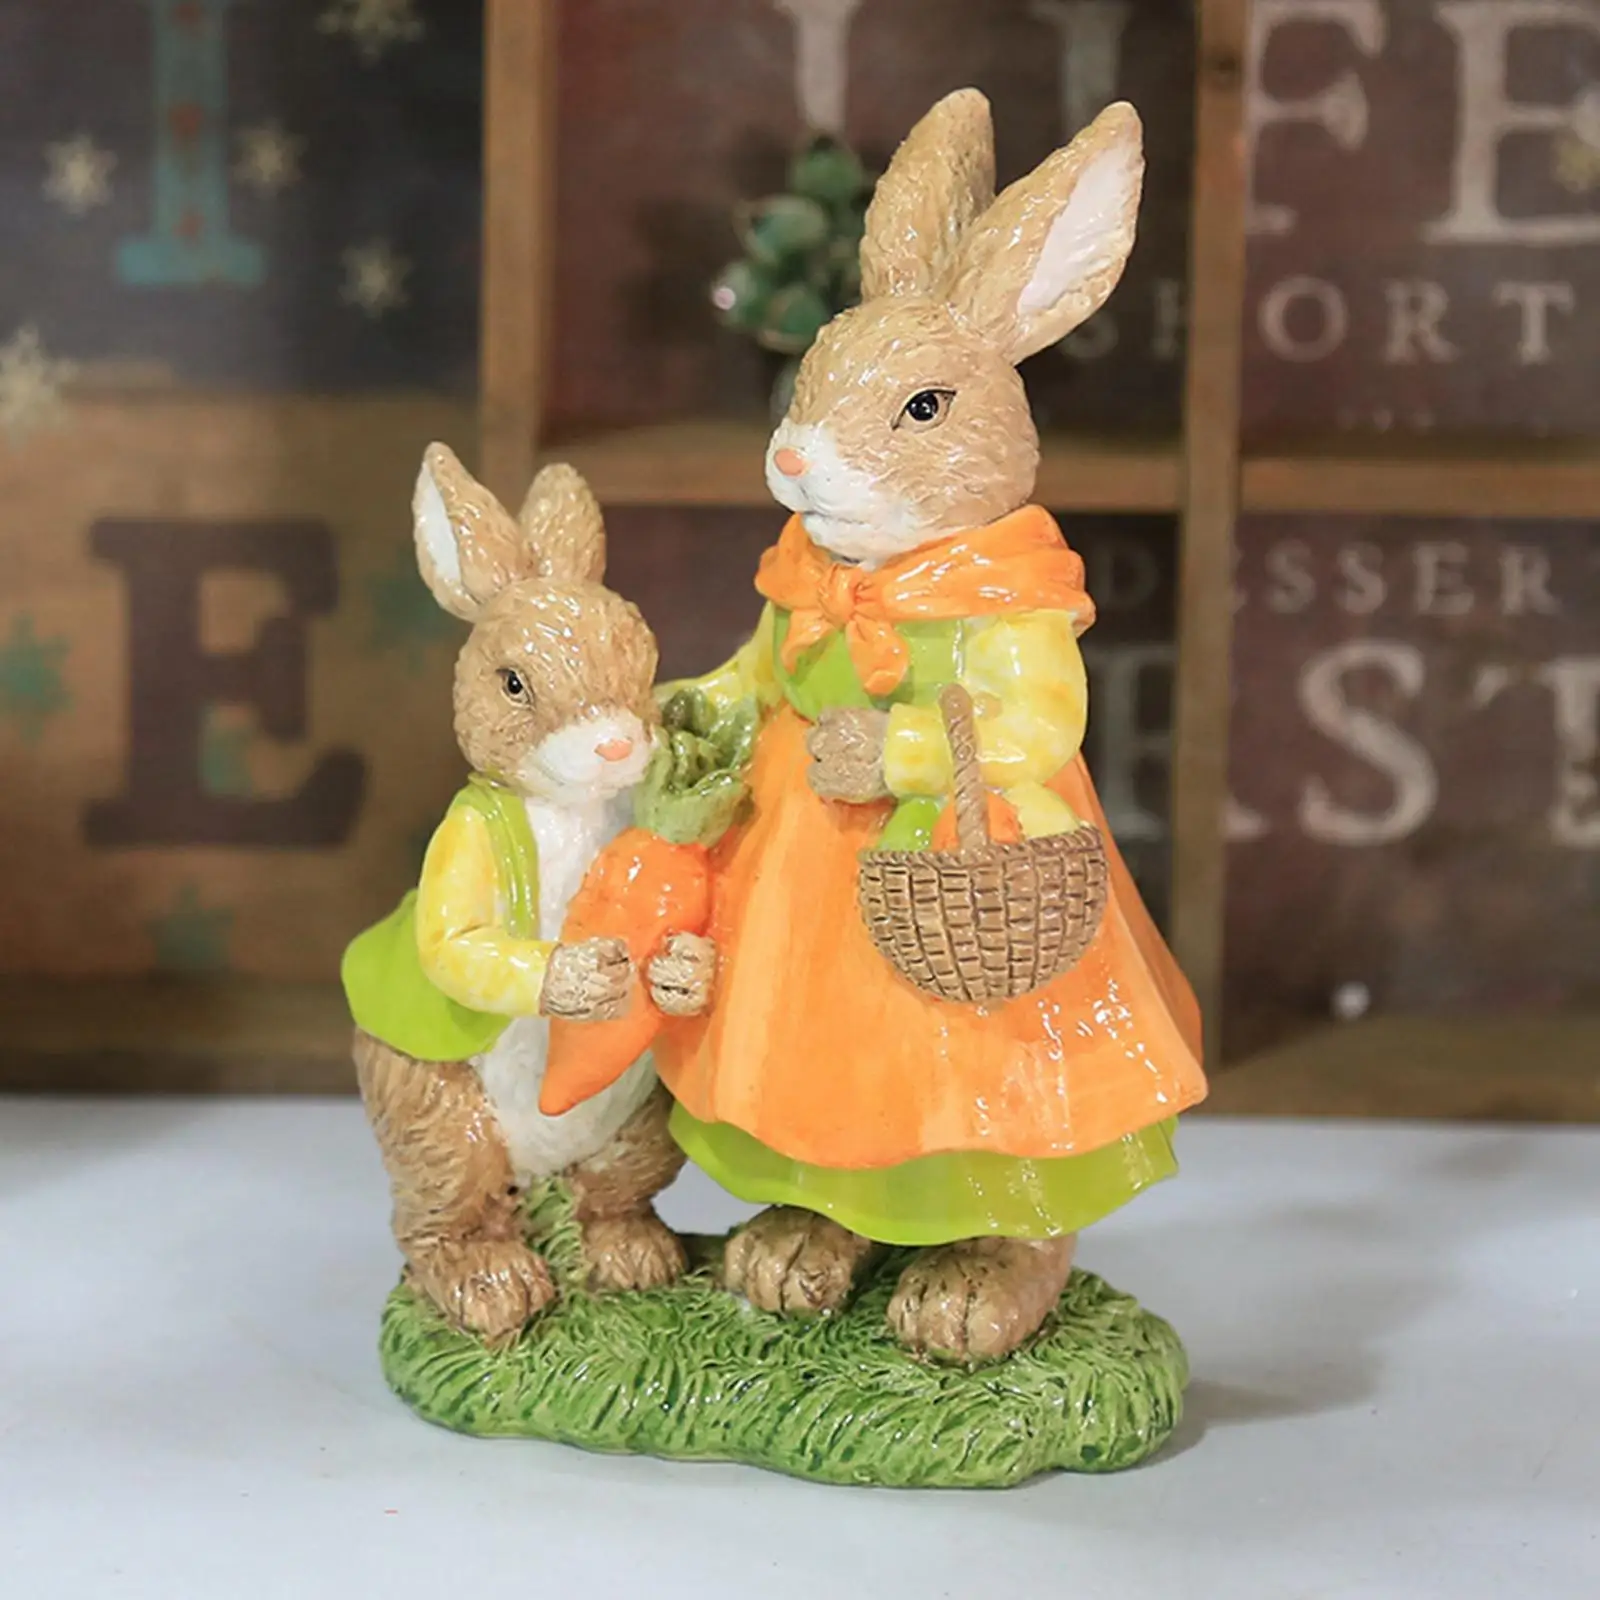 Easter Bunny Statue Easter Bunny Planter Easter Bunny Vase Easter Bunny Figurine Easter Bunny Vintage Easter Easter